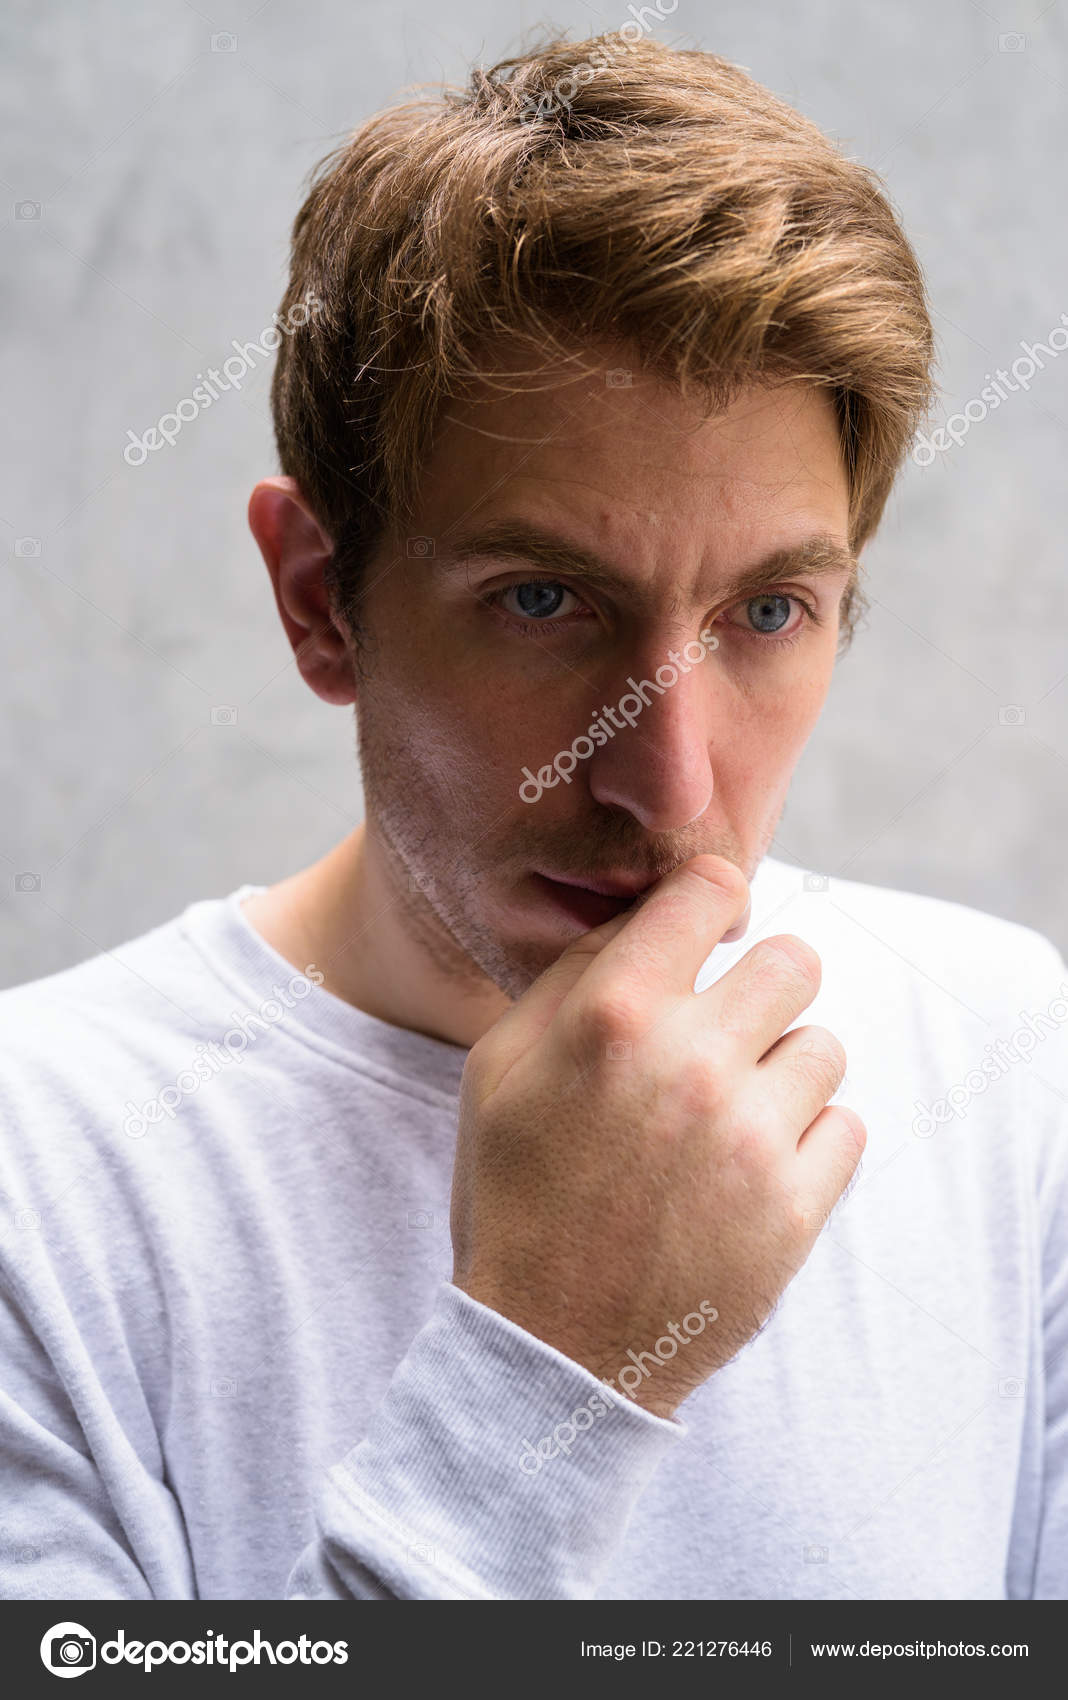 Portrait Of Handsome Man With Blond Hair Against Concrete Wall